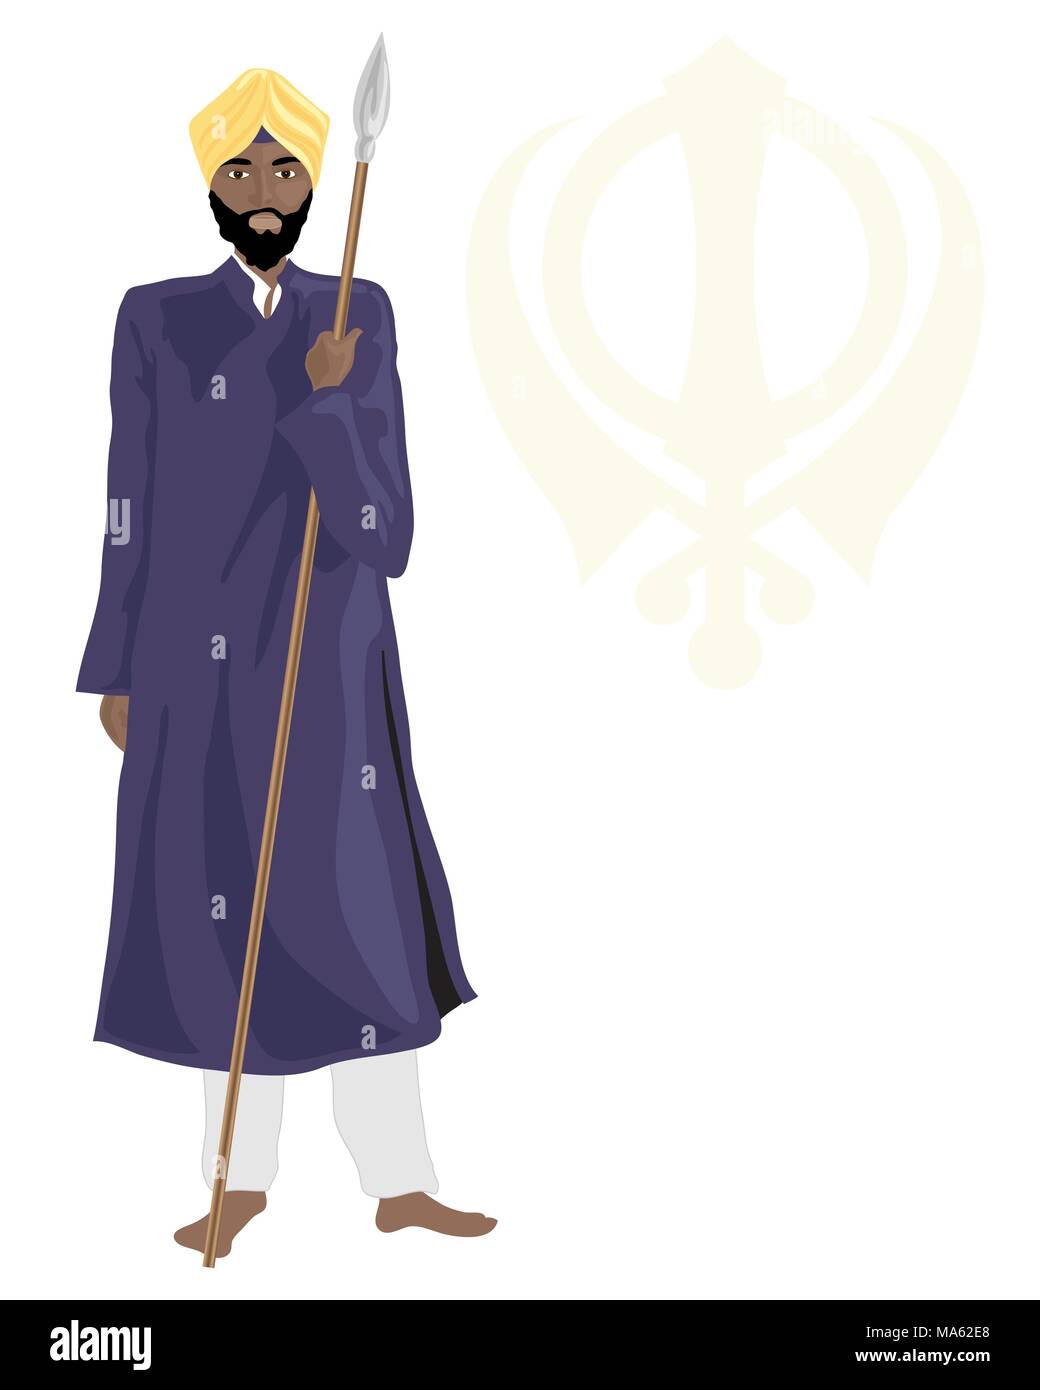 a vector illustration in eps format of a smart sikh temple guard with yellow turban dark blue overcoat and ceremonial wooden spear with sikh symbol Stock Vector